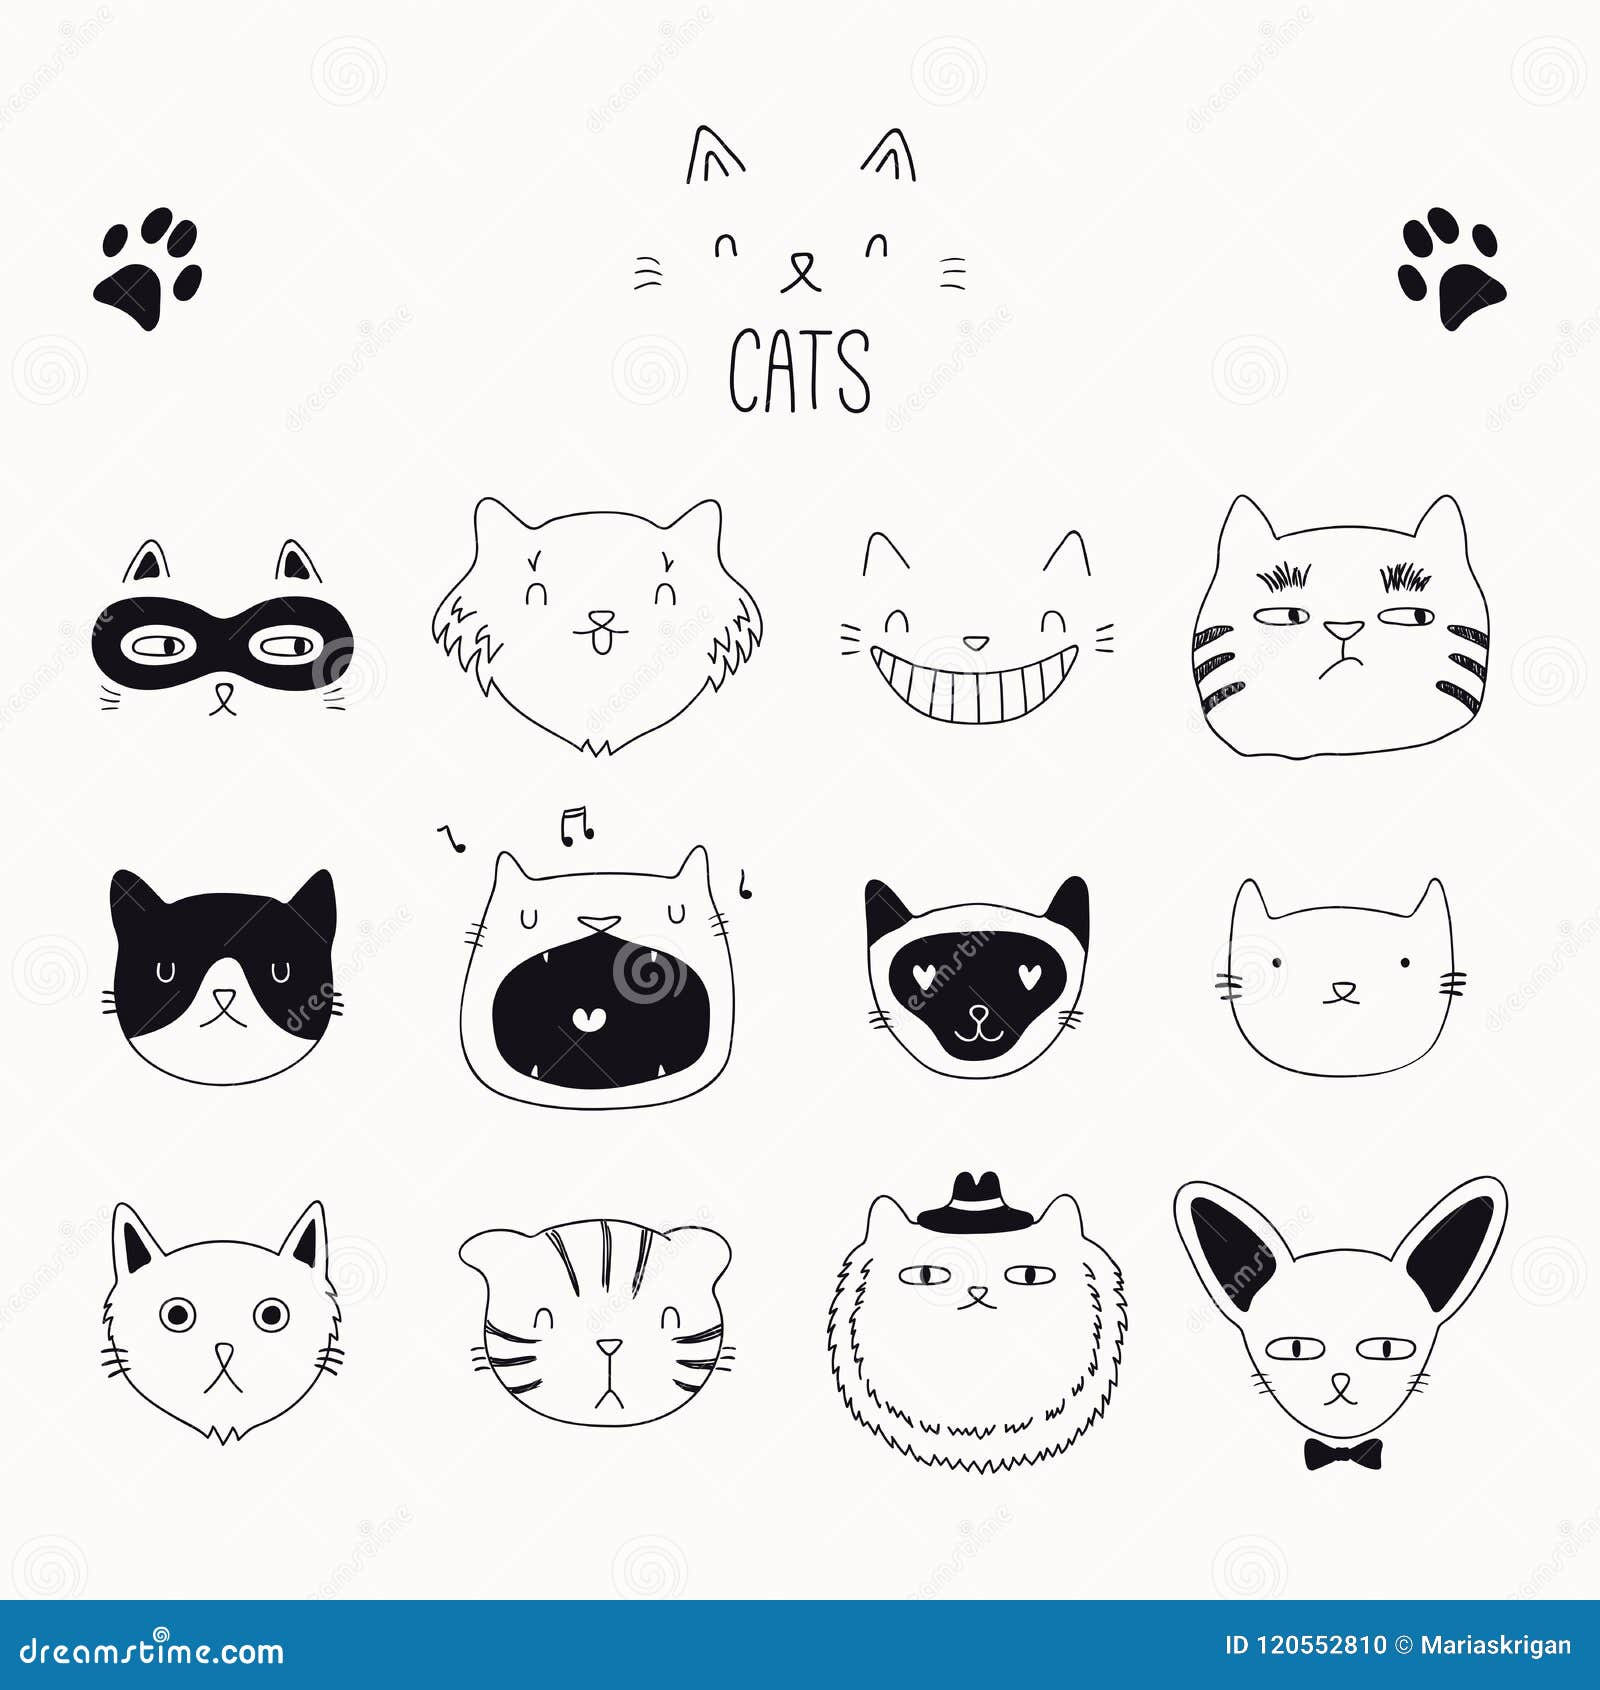 Cute Cats Clipart, Funny Cat Stickers Graphic by Pod Design